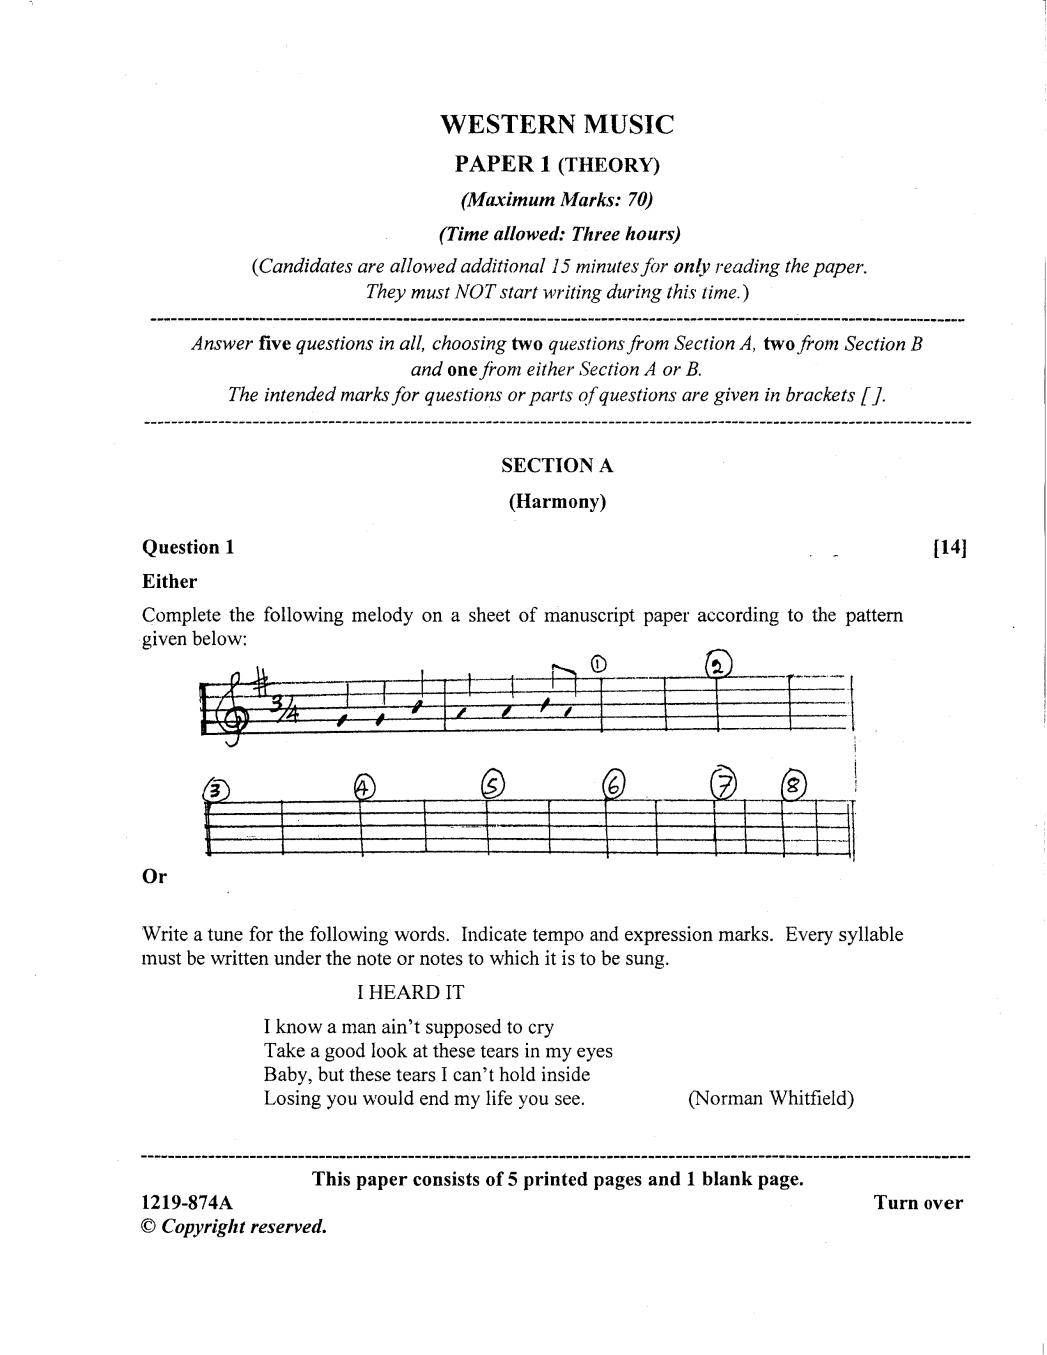 ISC Class 25 Question Paper 25 for Western Music Theory